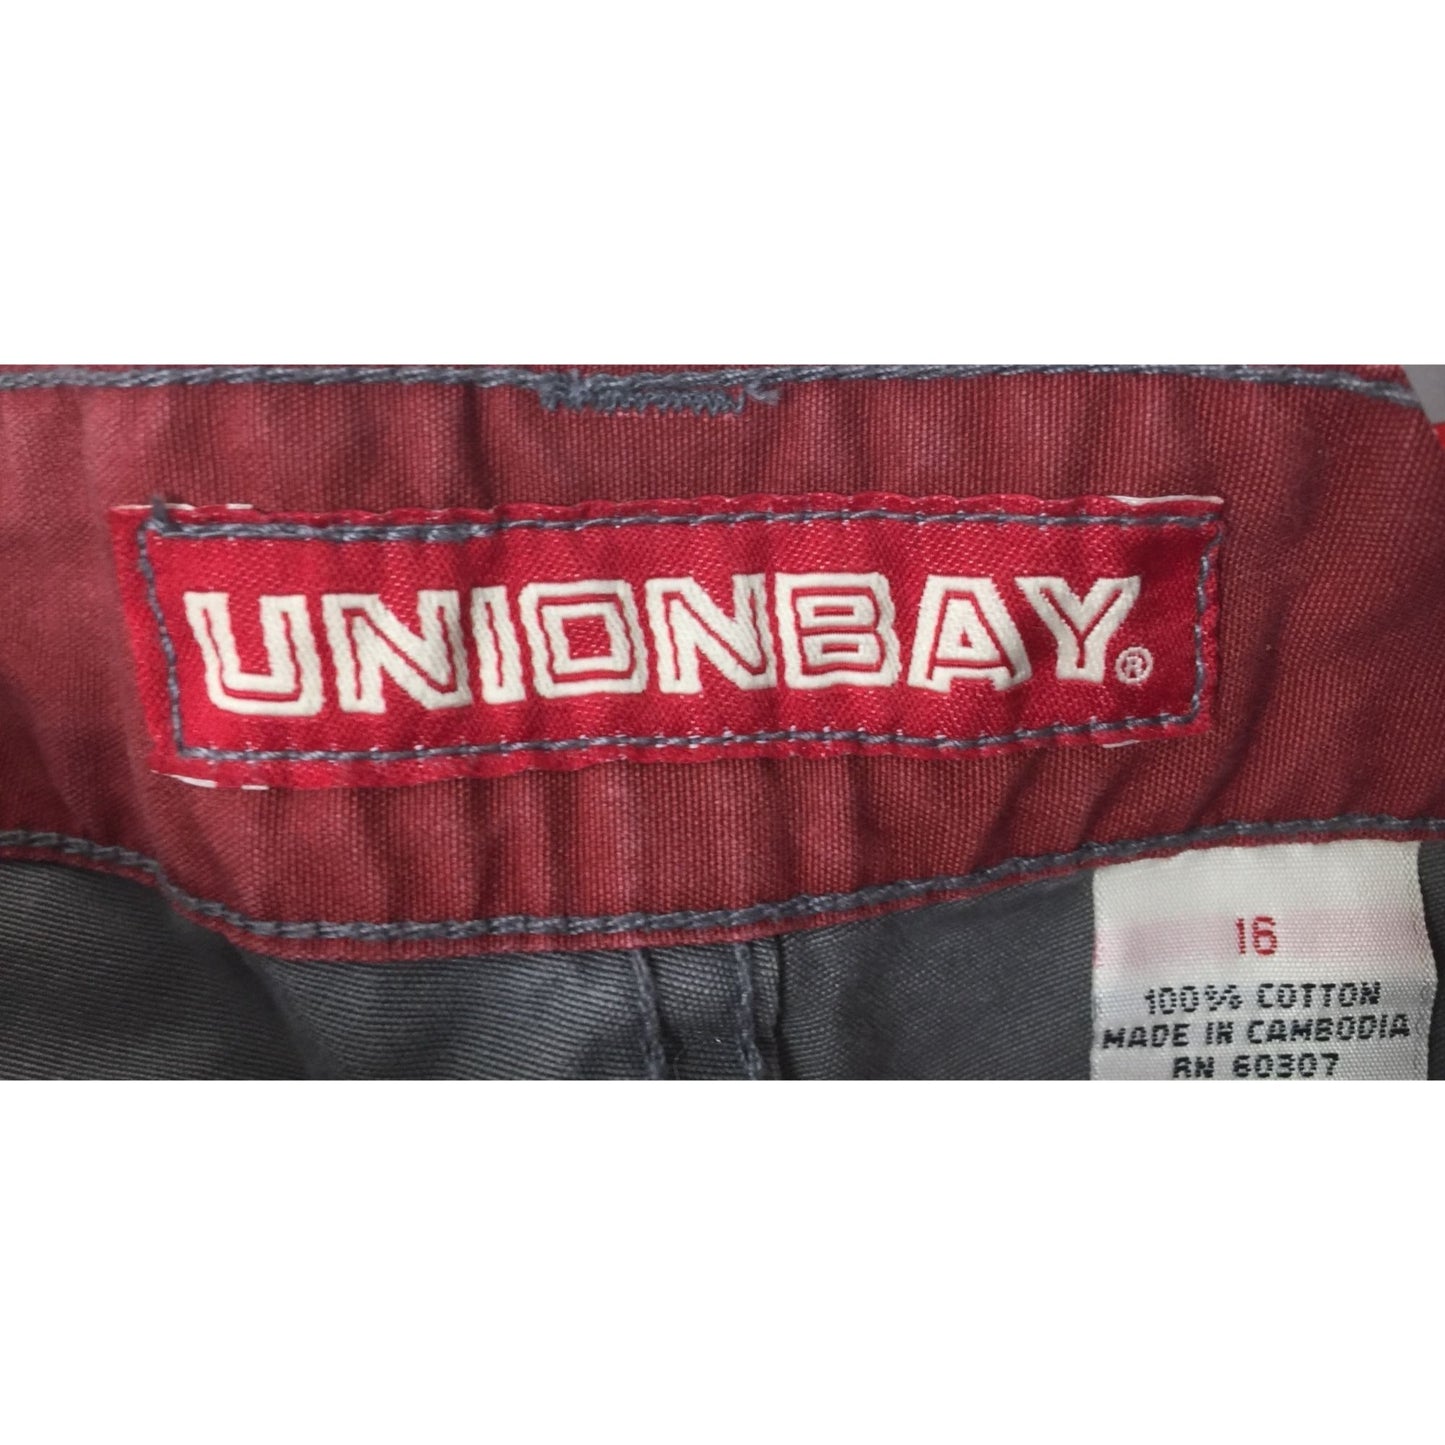 Unionbay Boy's Size 16 Pewter/Red Shorts w/ Pockets New with Tags